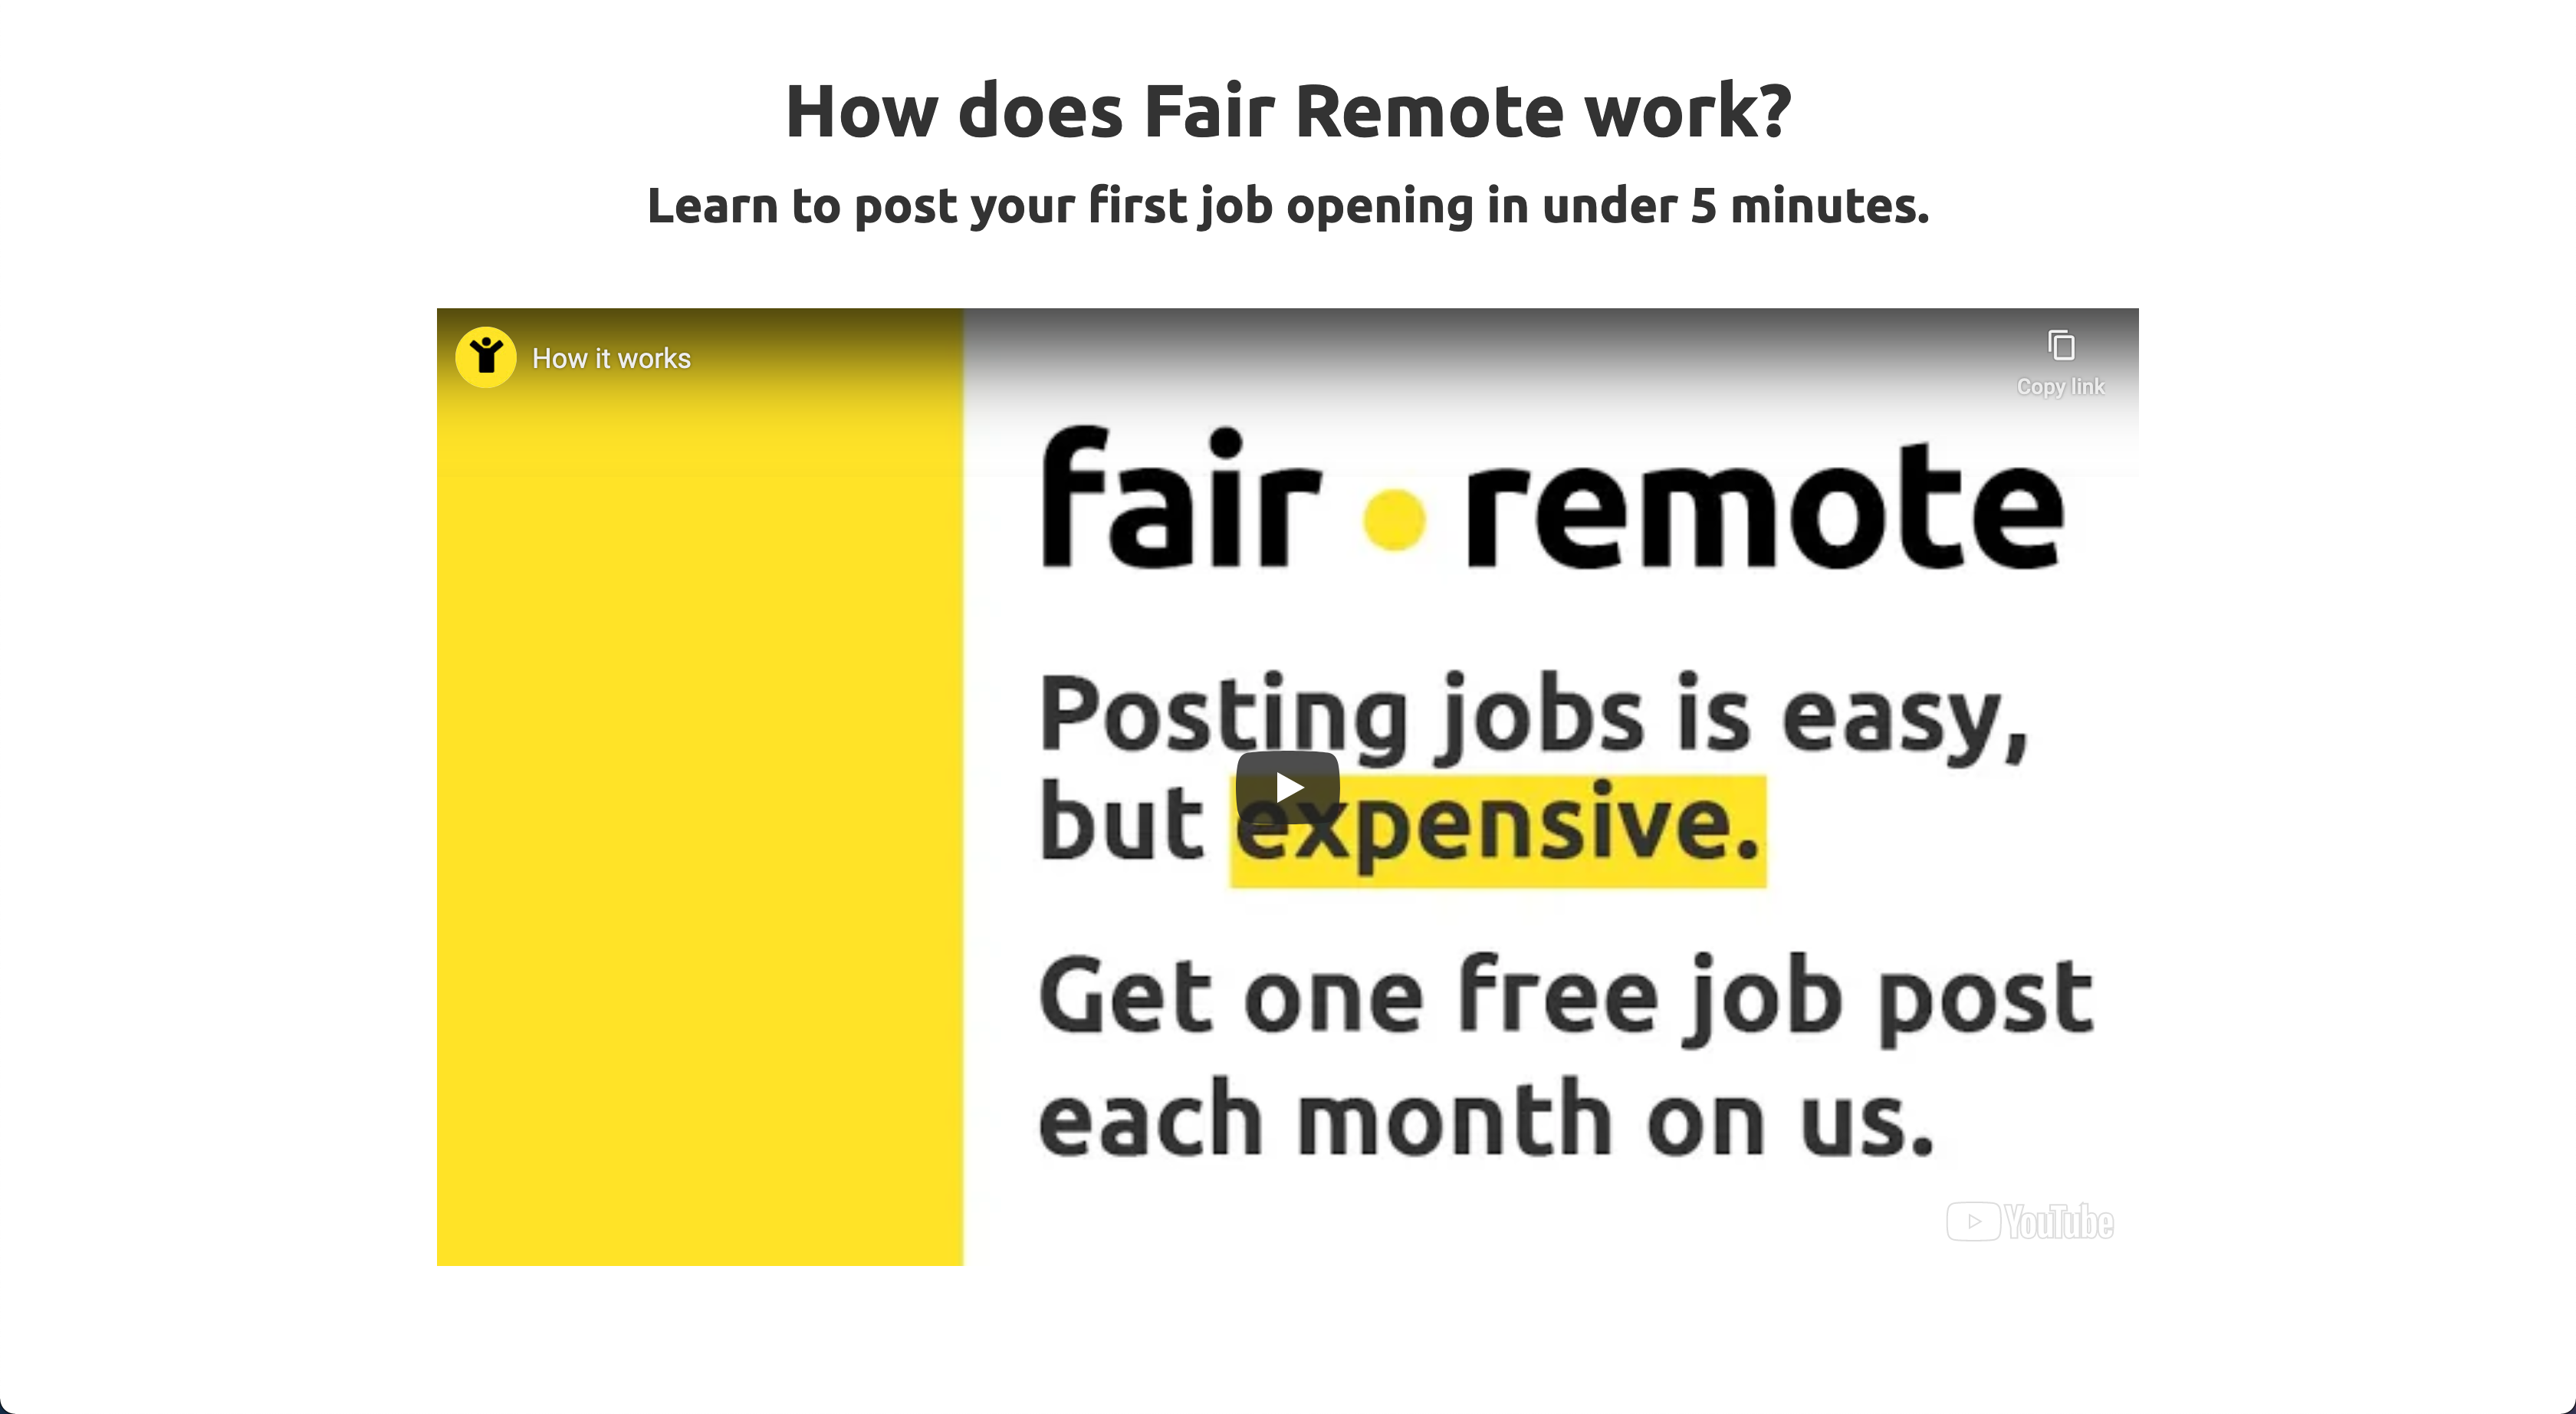 Find detailed information about Fair Remote